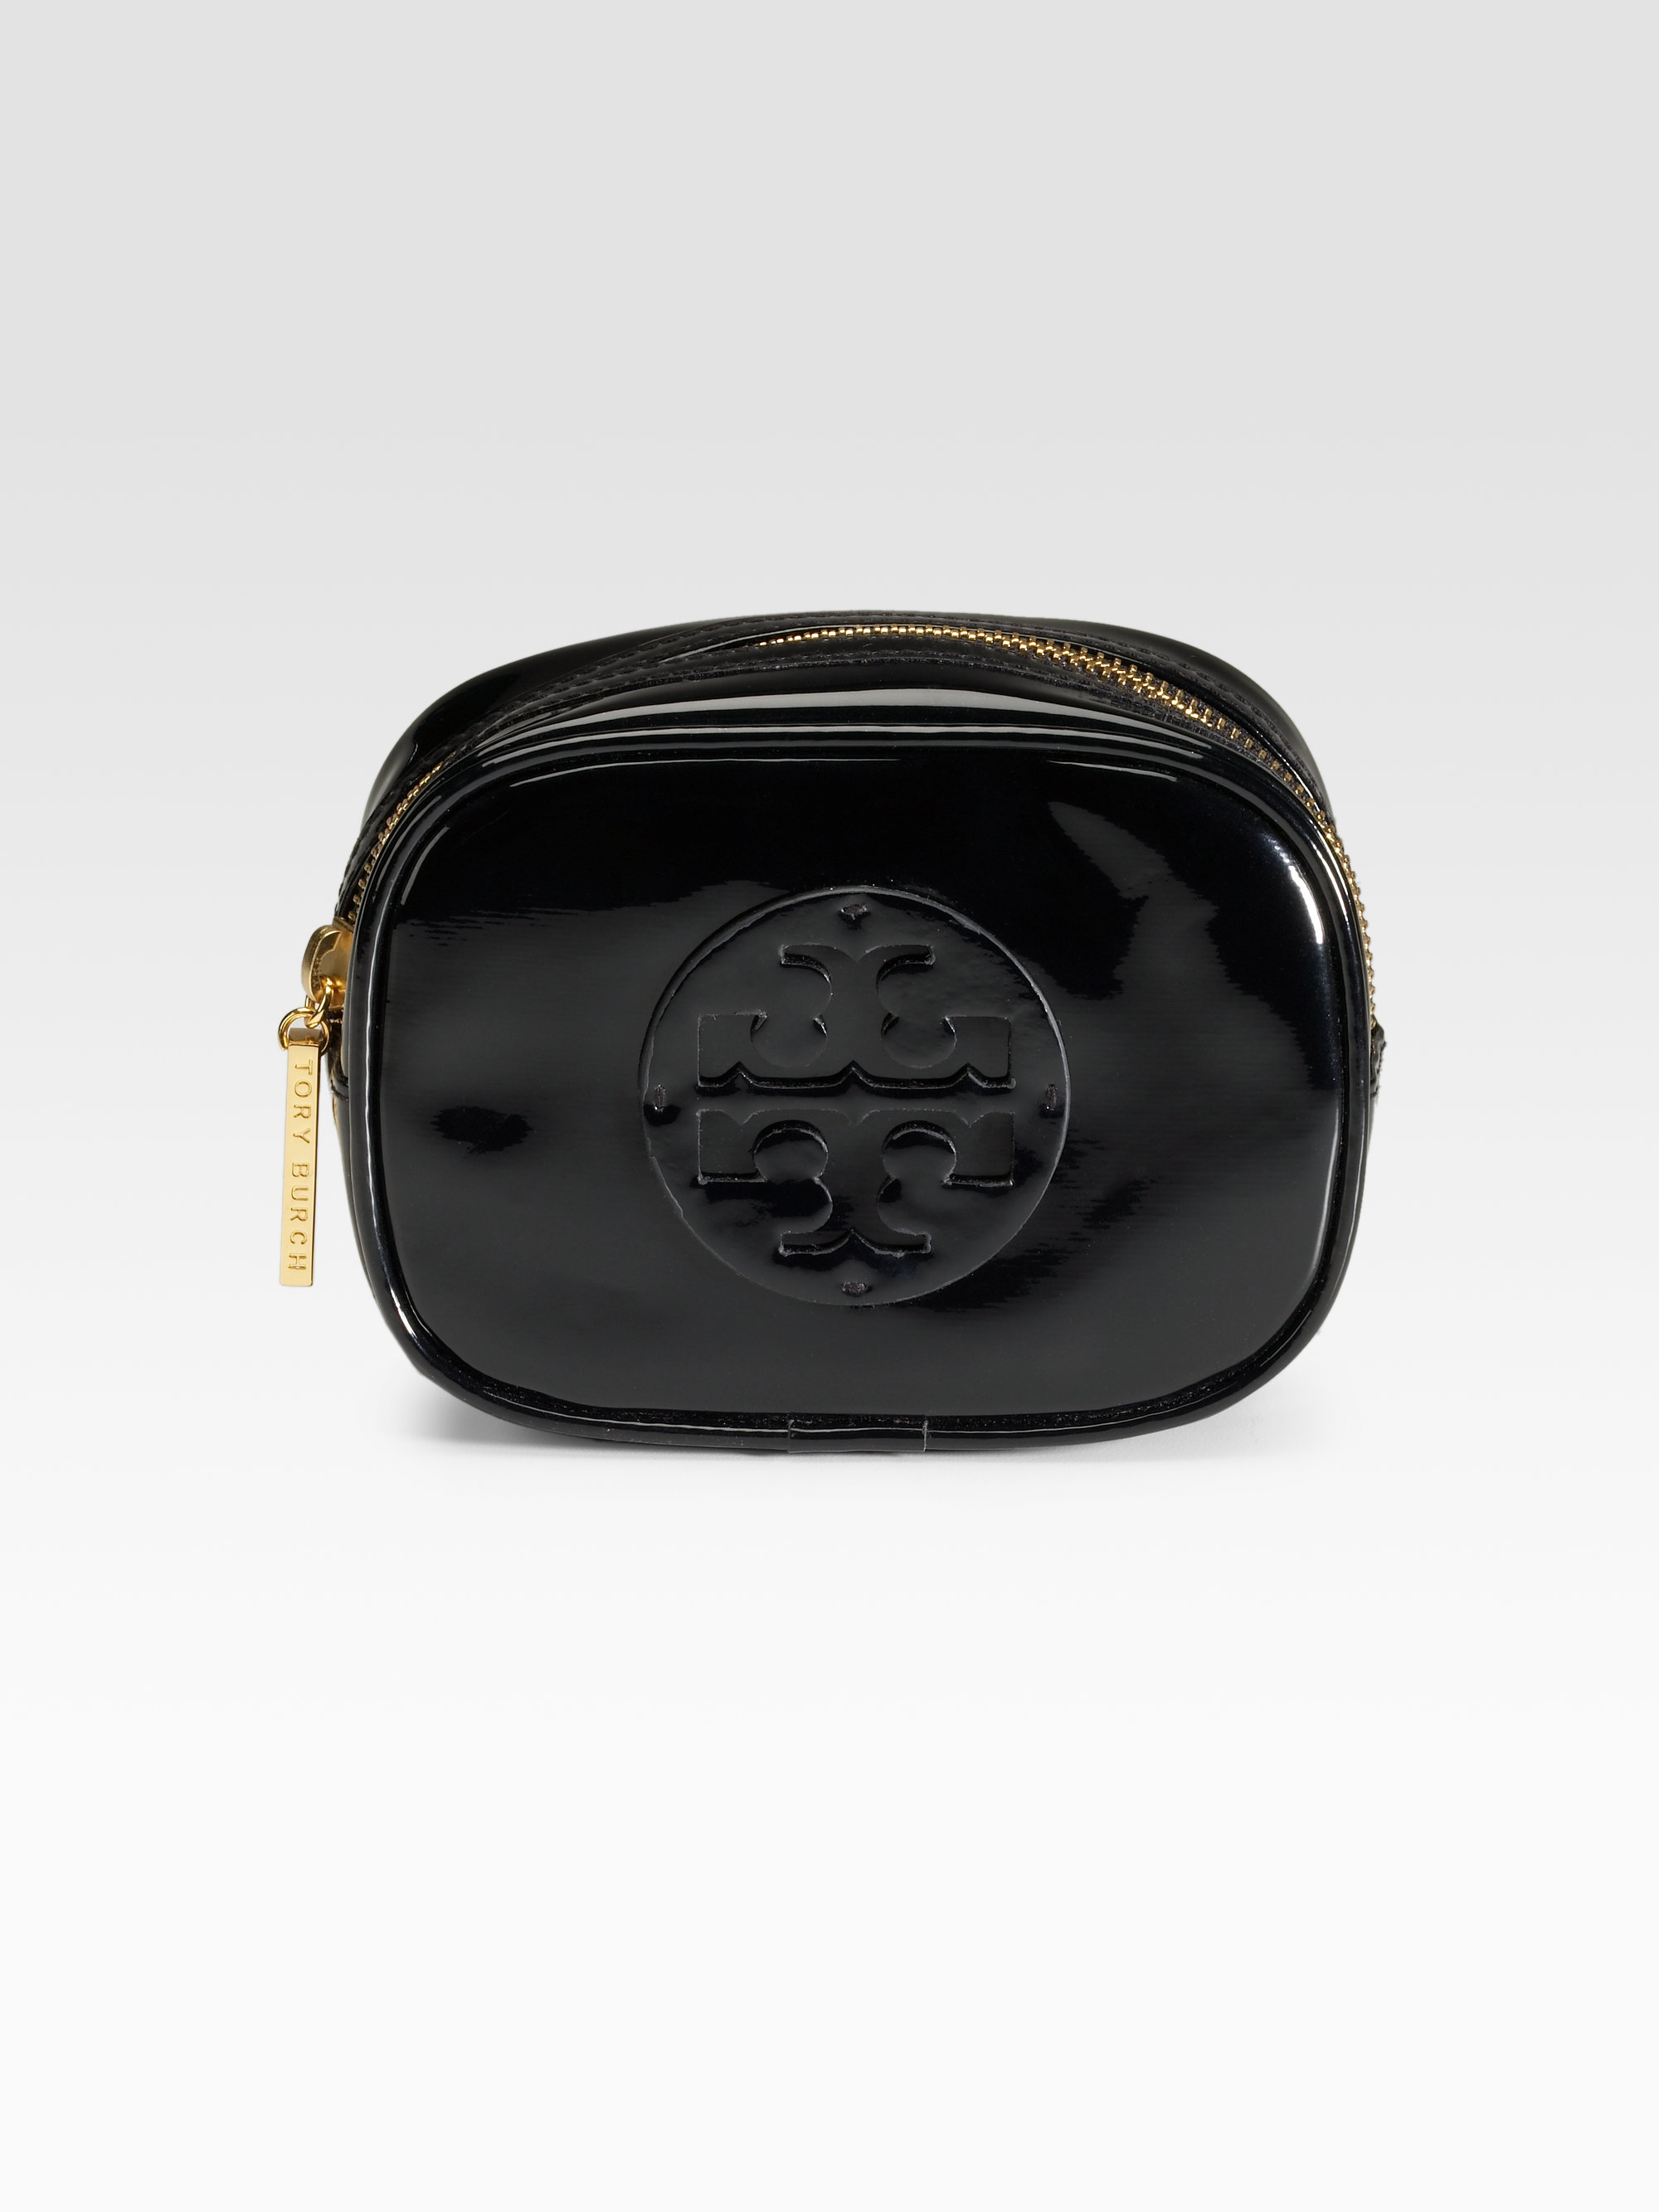 Lyst - Tory Burch Patent Leather Cosmetic Bag in Black